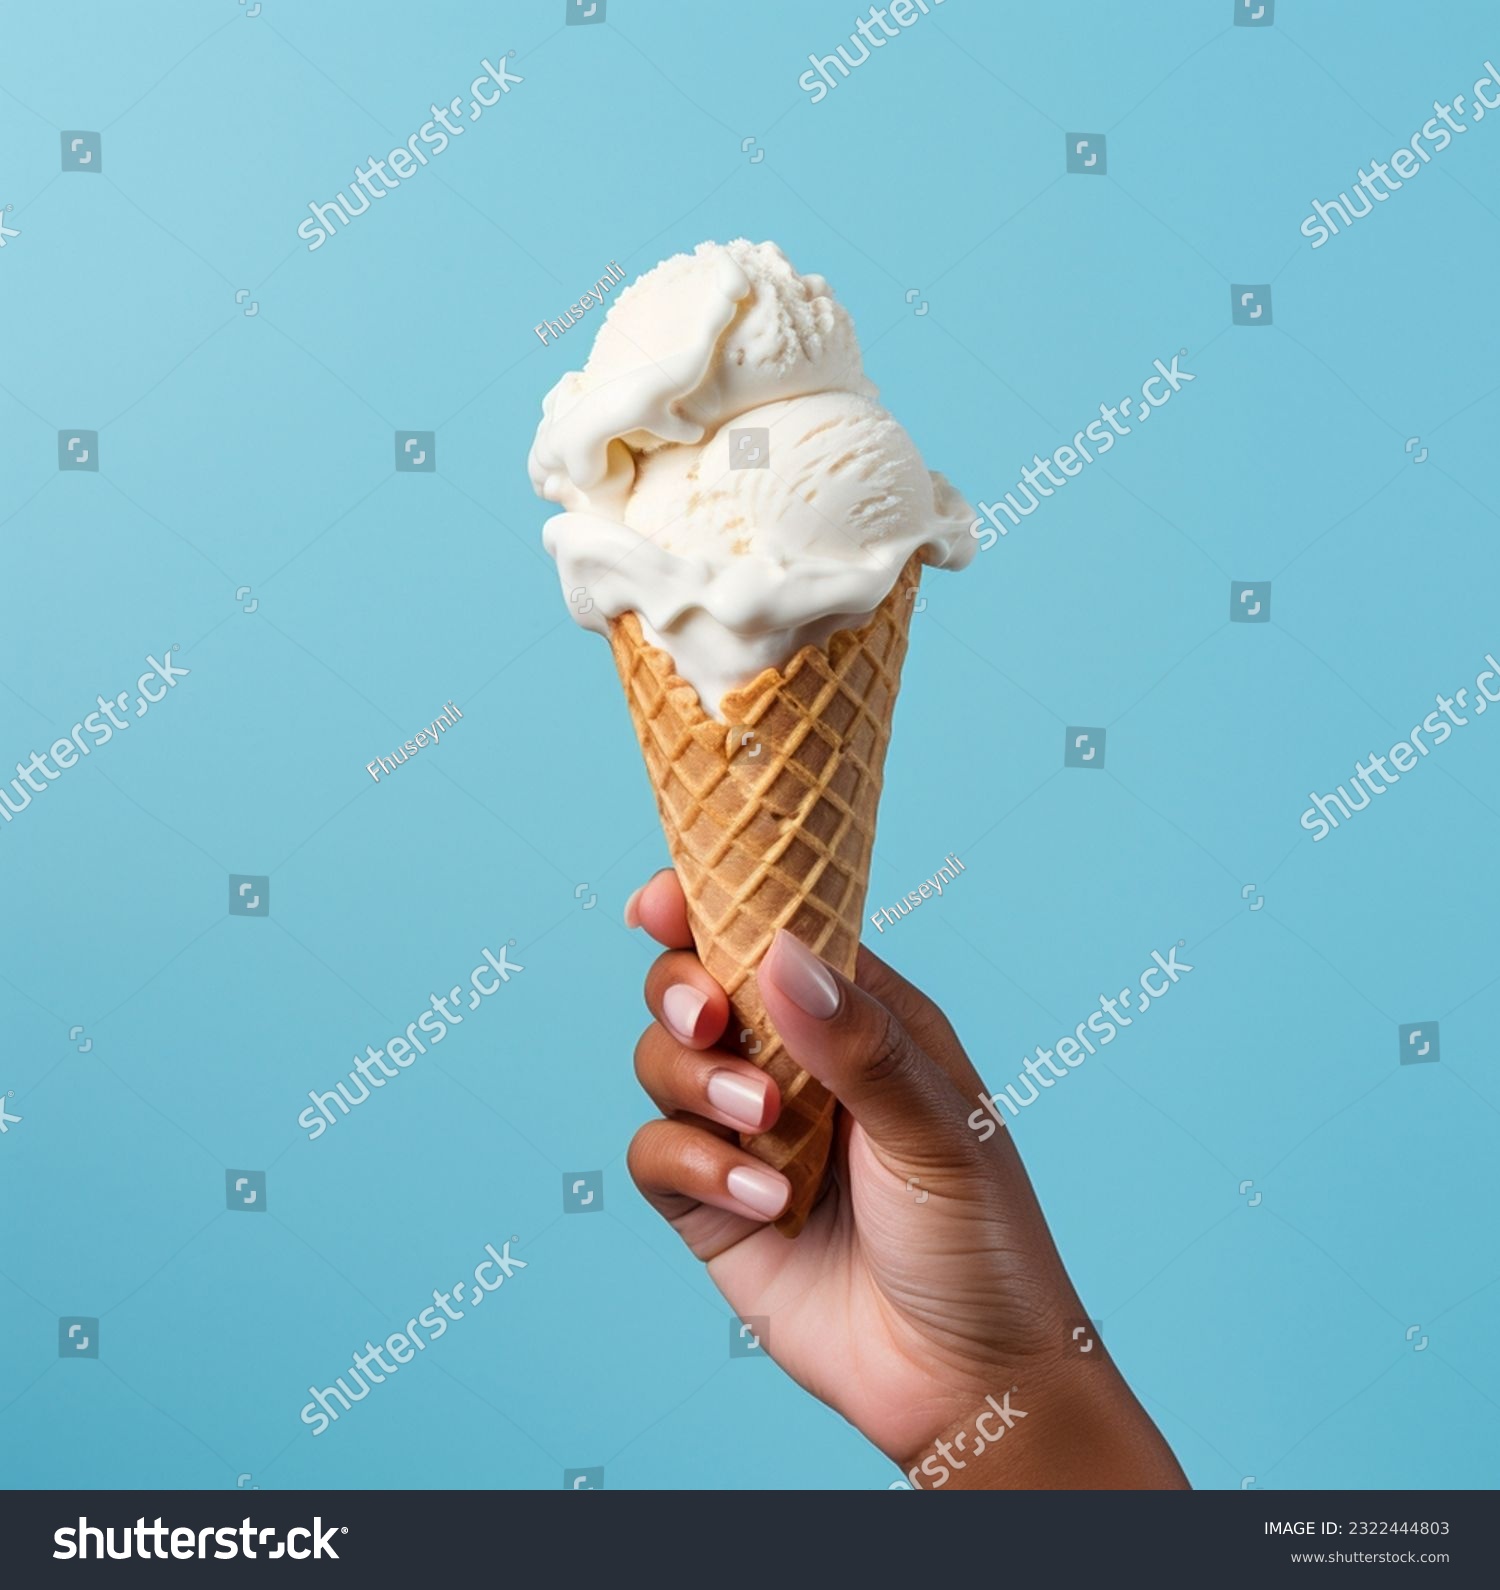 Ice cream cone on a blue background. The woman holding the ice cream by hand.
 #2322444803